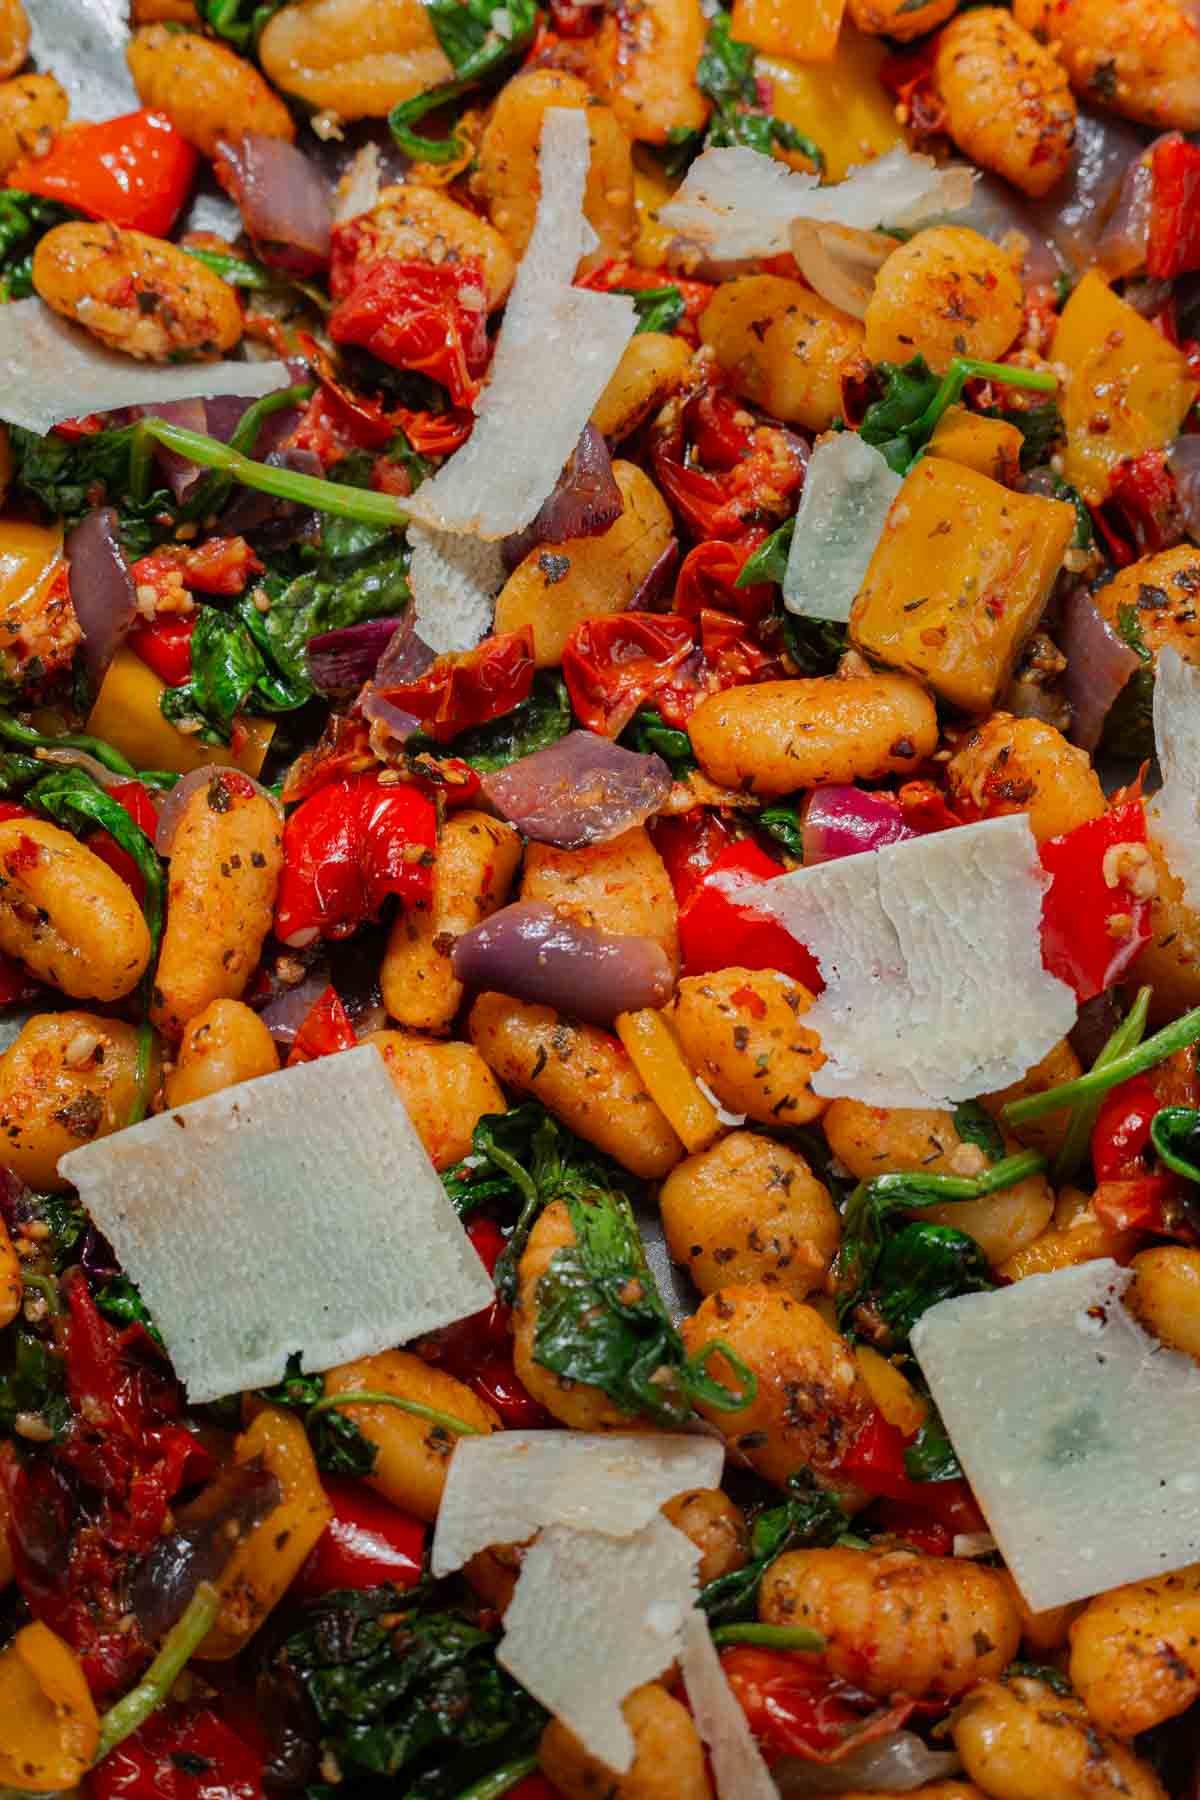 Close up of sheet pan gnocchi showing the bright red bell peppers, vibrant green spinach, assortment of spices, and large parmesan shavings on top.